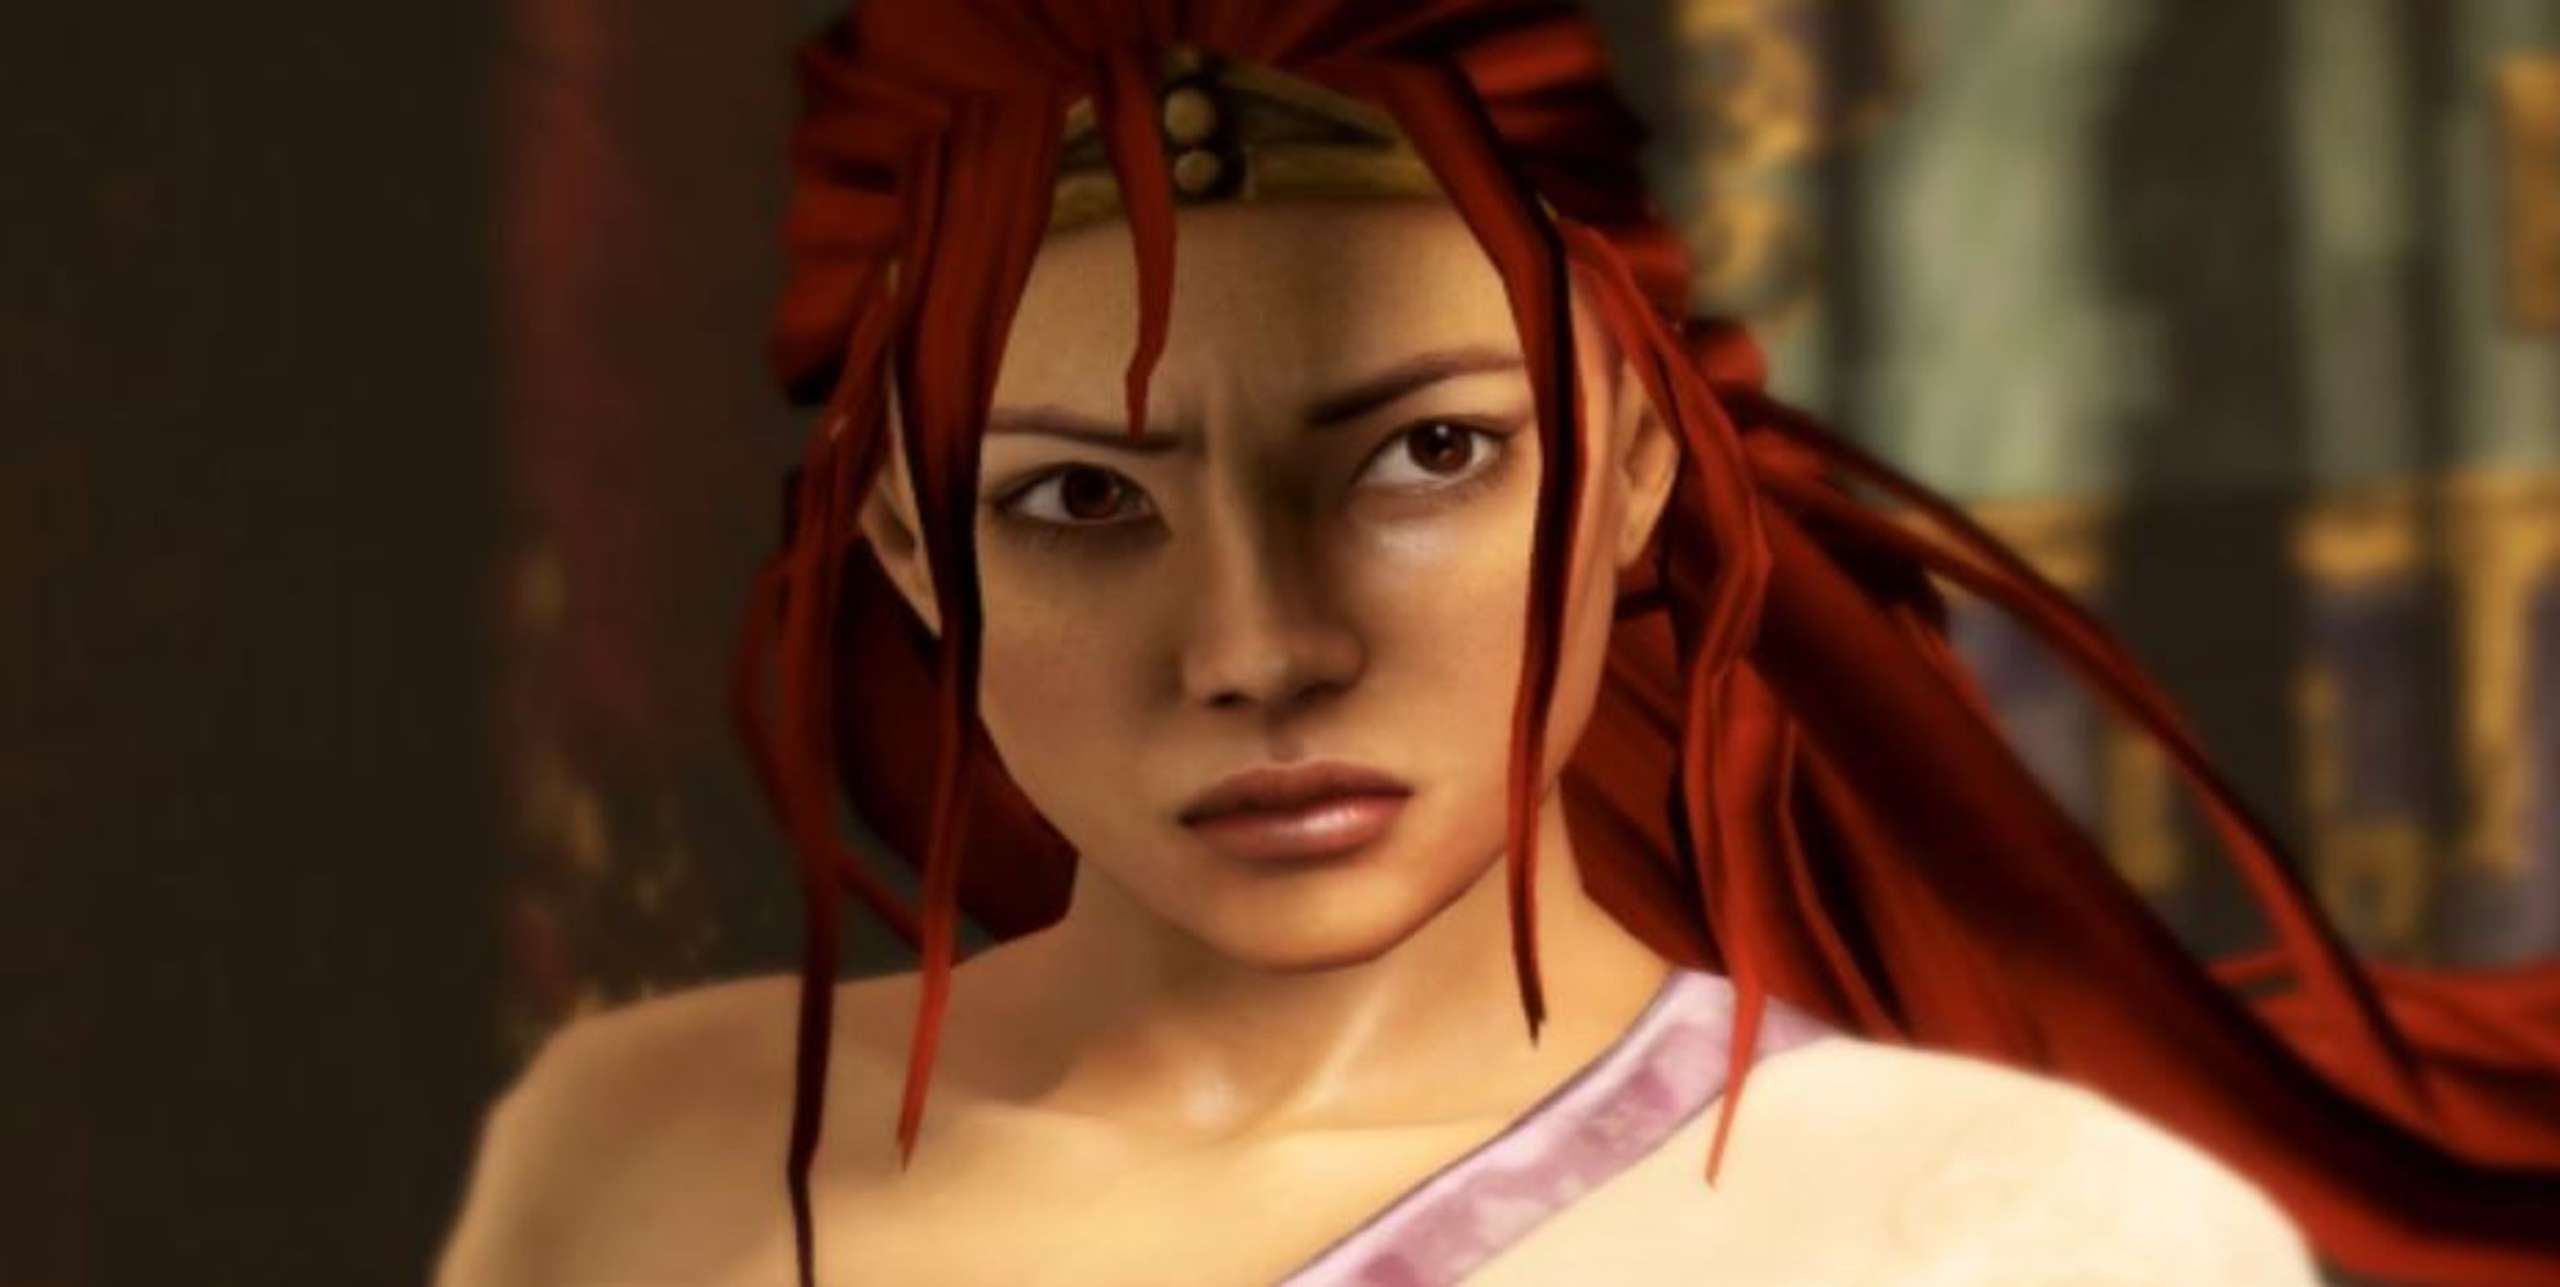 The One Off PS3 Classic Heavenly Sword, Which Might Have Spawned A Franchise, Is Being Remastered Or Followed By PlayStation Aficionados